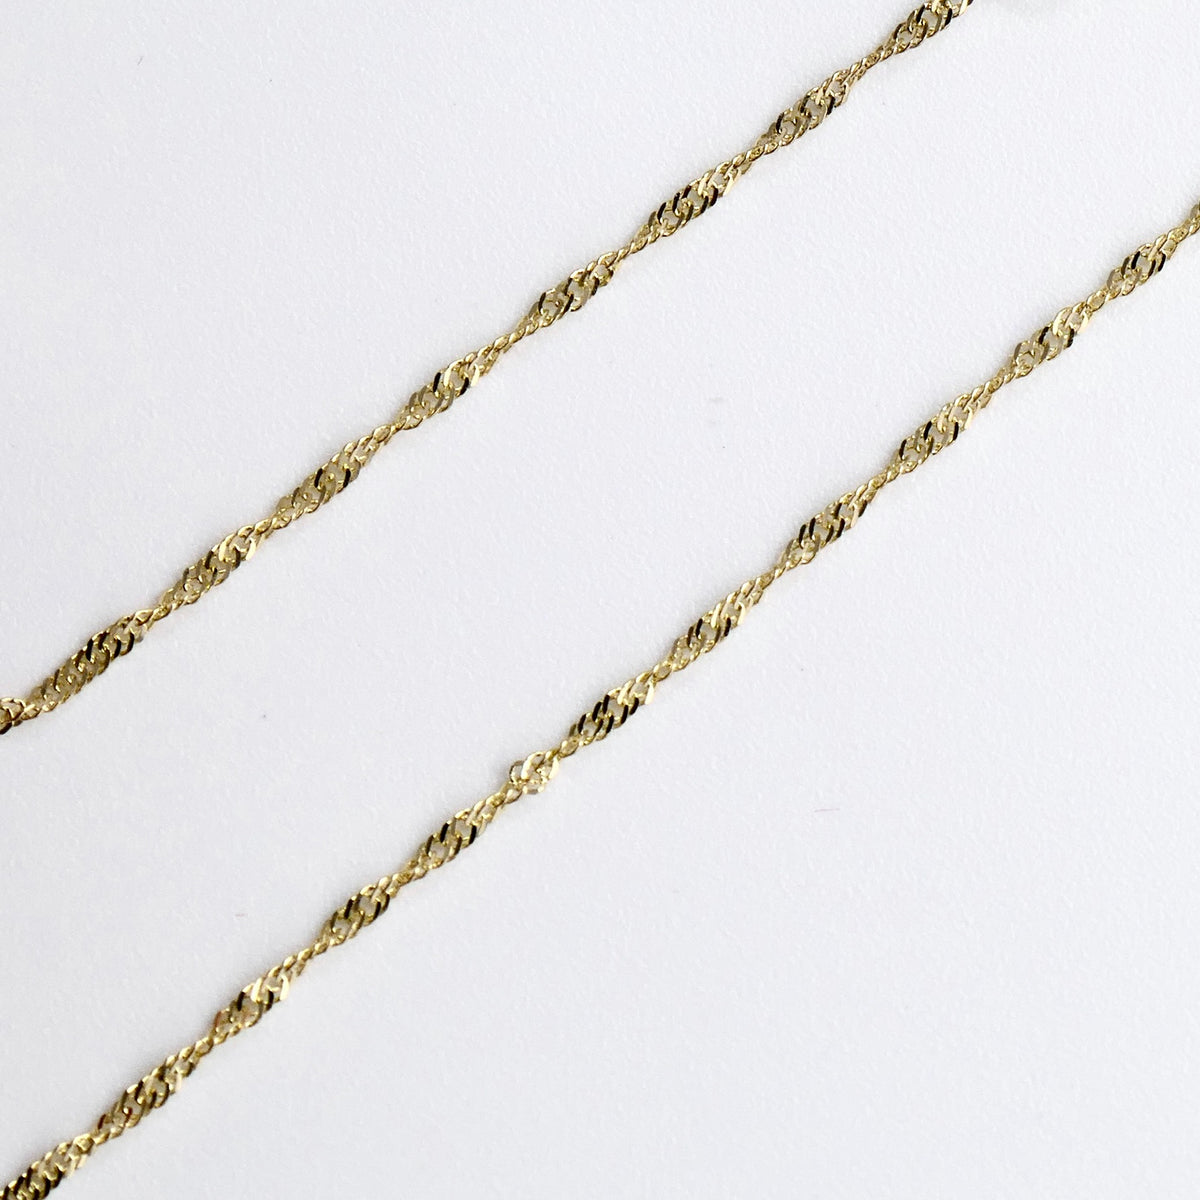 14K Yellow Gold 18" Singapore Twisted Link Chain Necklace